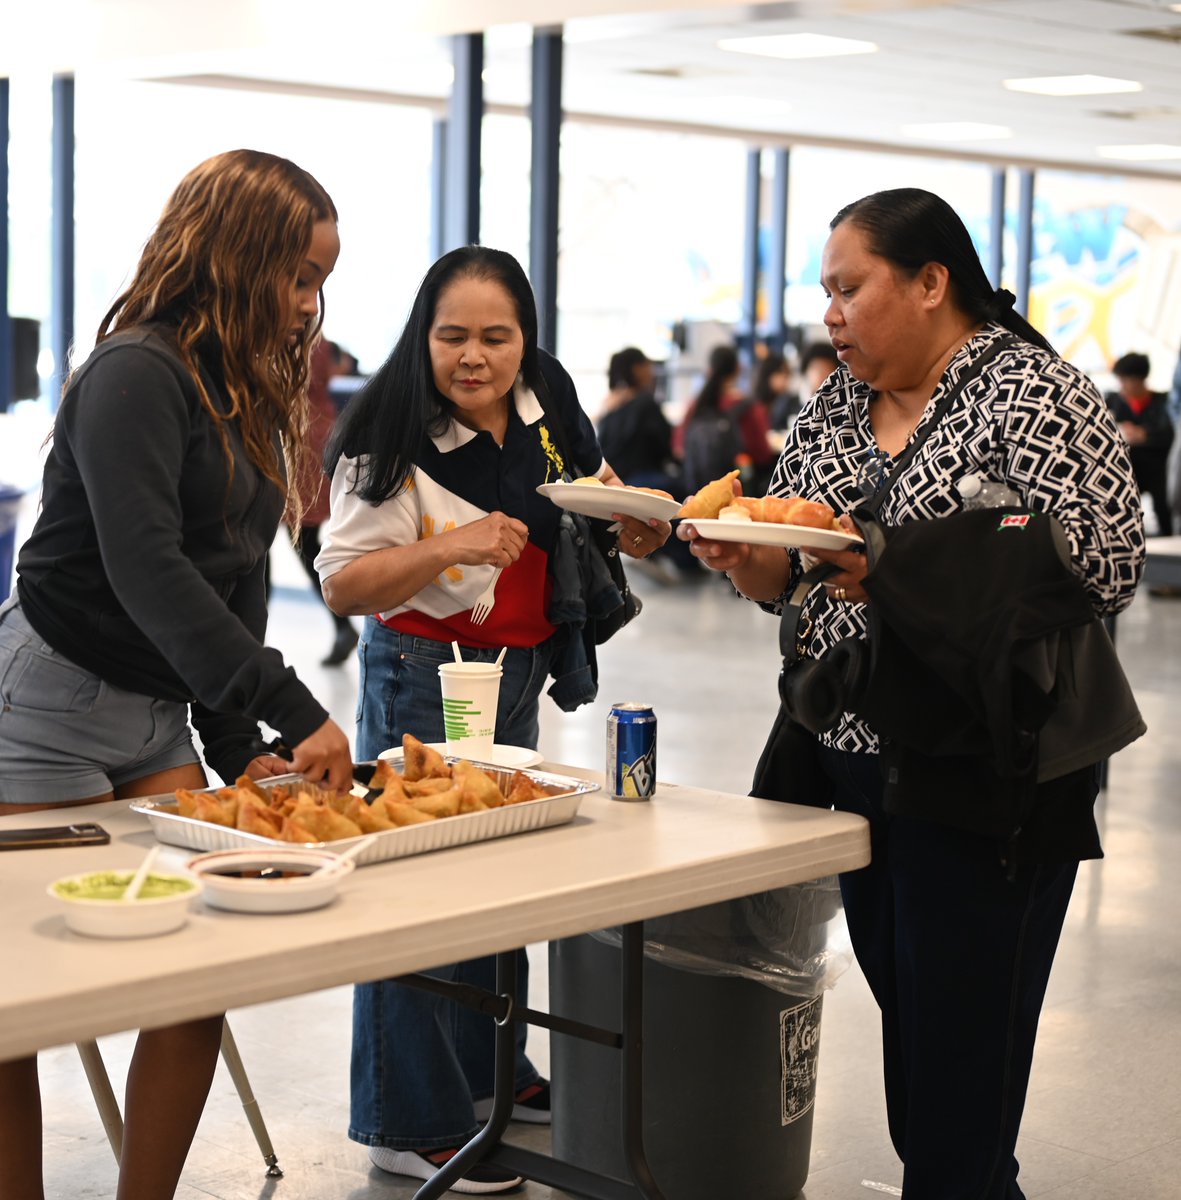 Our Lady of Lourdes hosted its Multicultural Festival this past week welcoming over 200 people to the school’s cafeteria for the free event to celebrate diversity and culture. Read more at: wellingtoncdsb.ca/apps/news/arti…